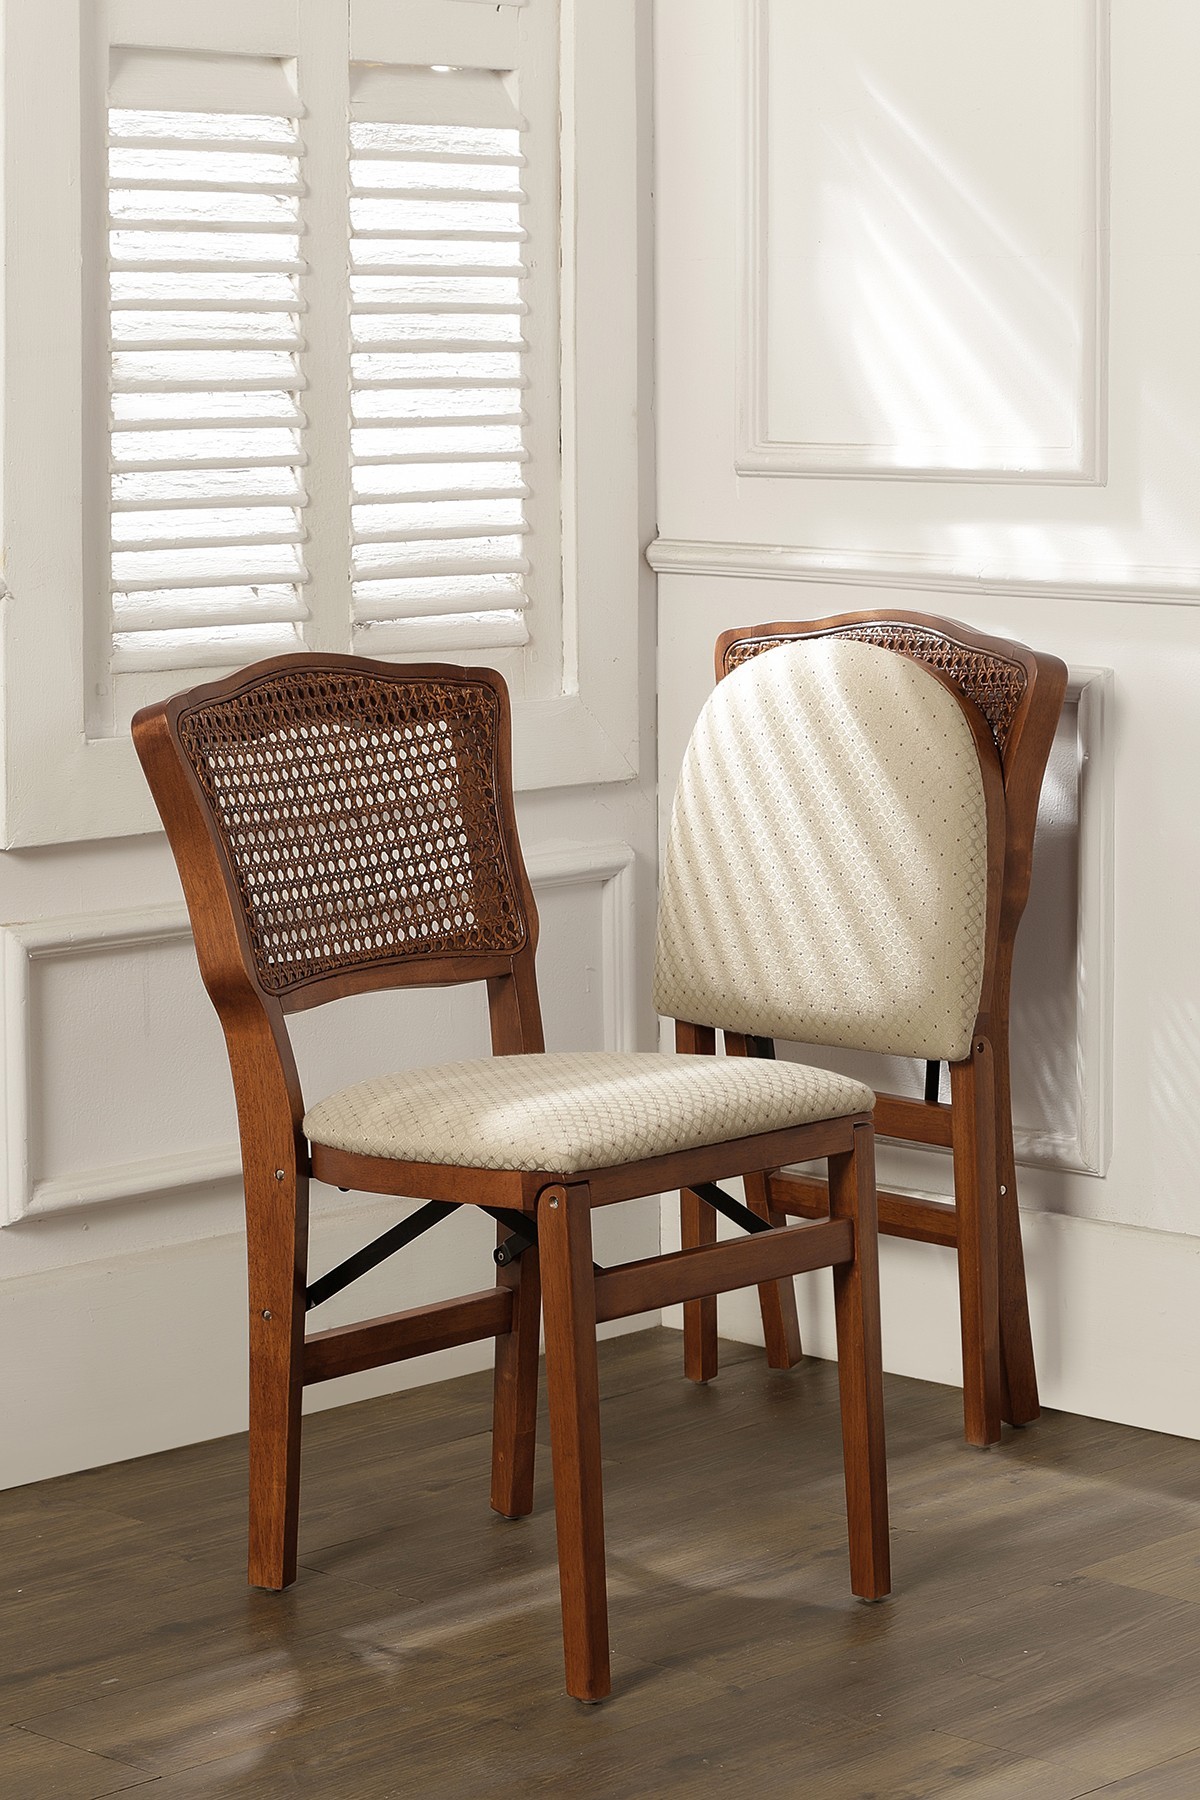 Upholstered Seat Folding Chair 